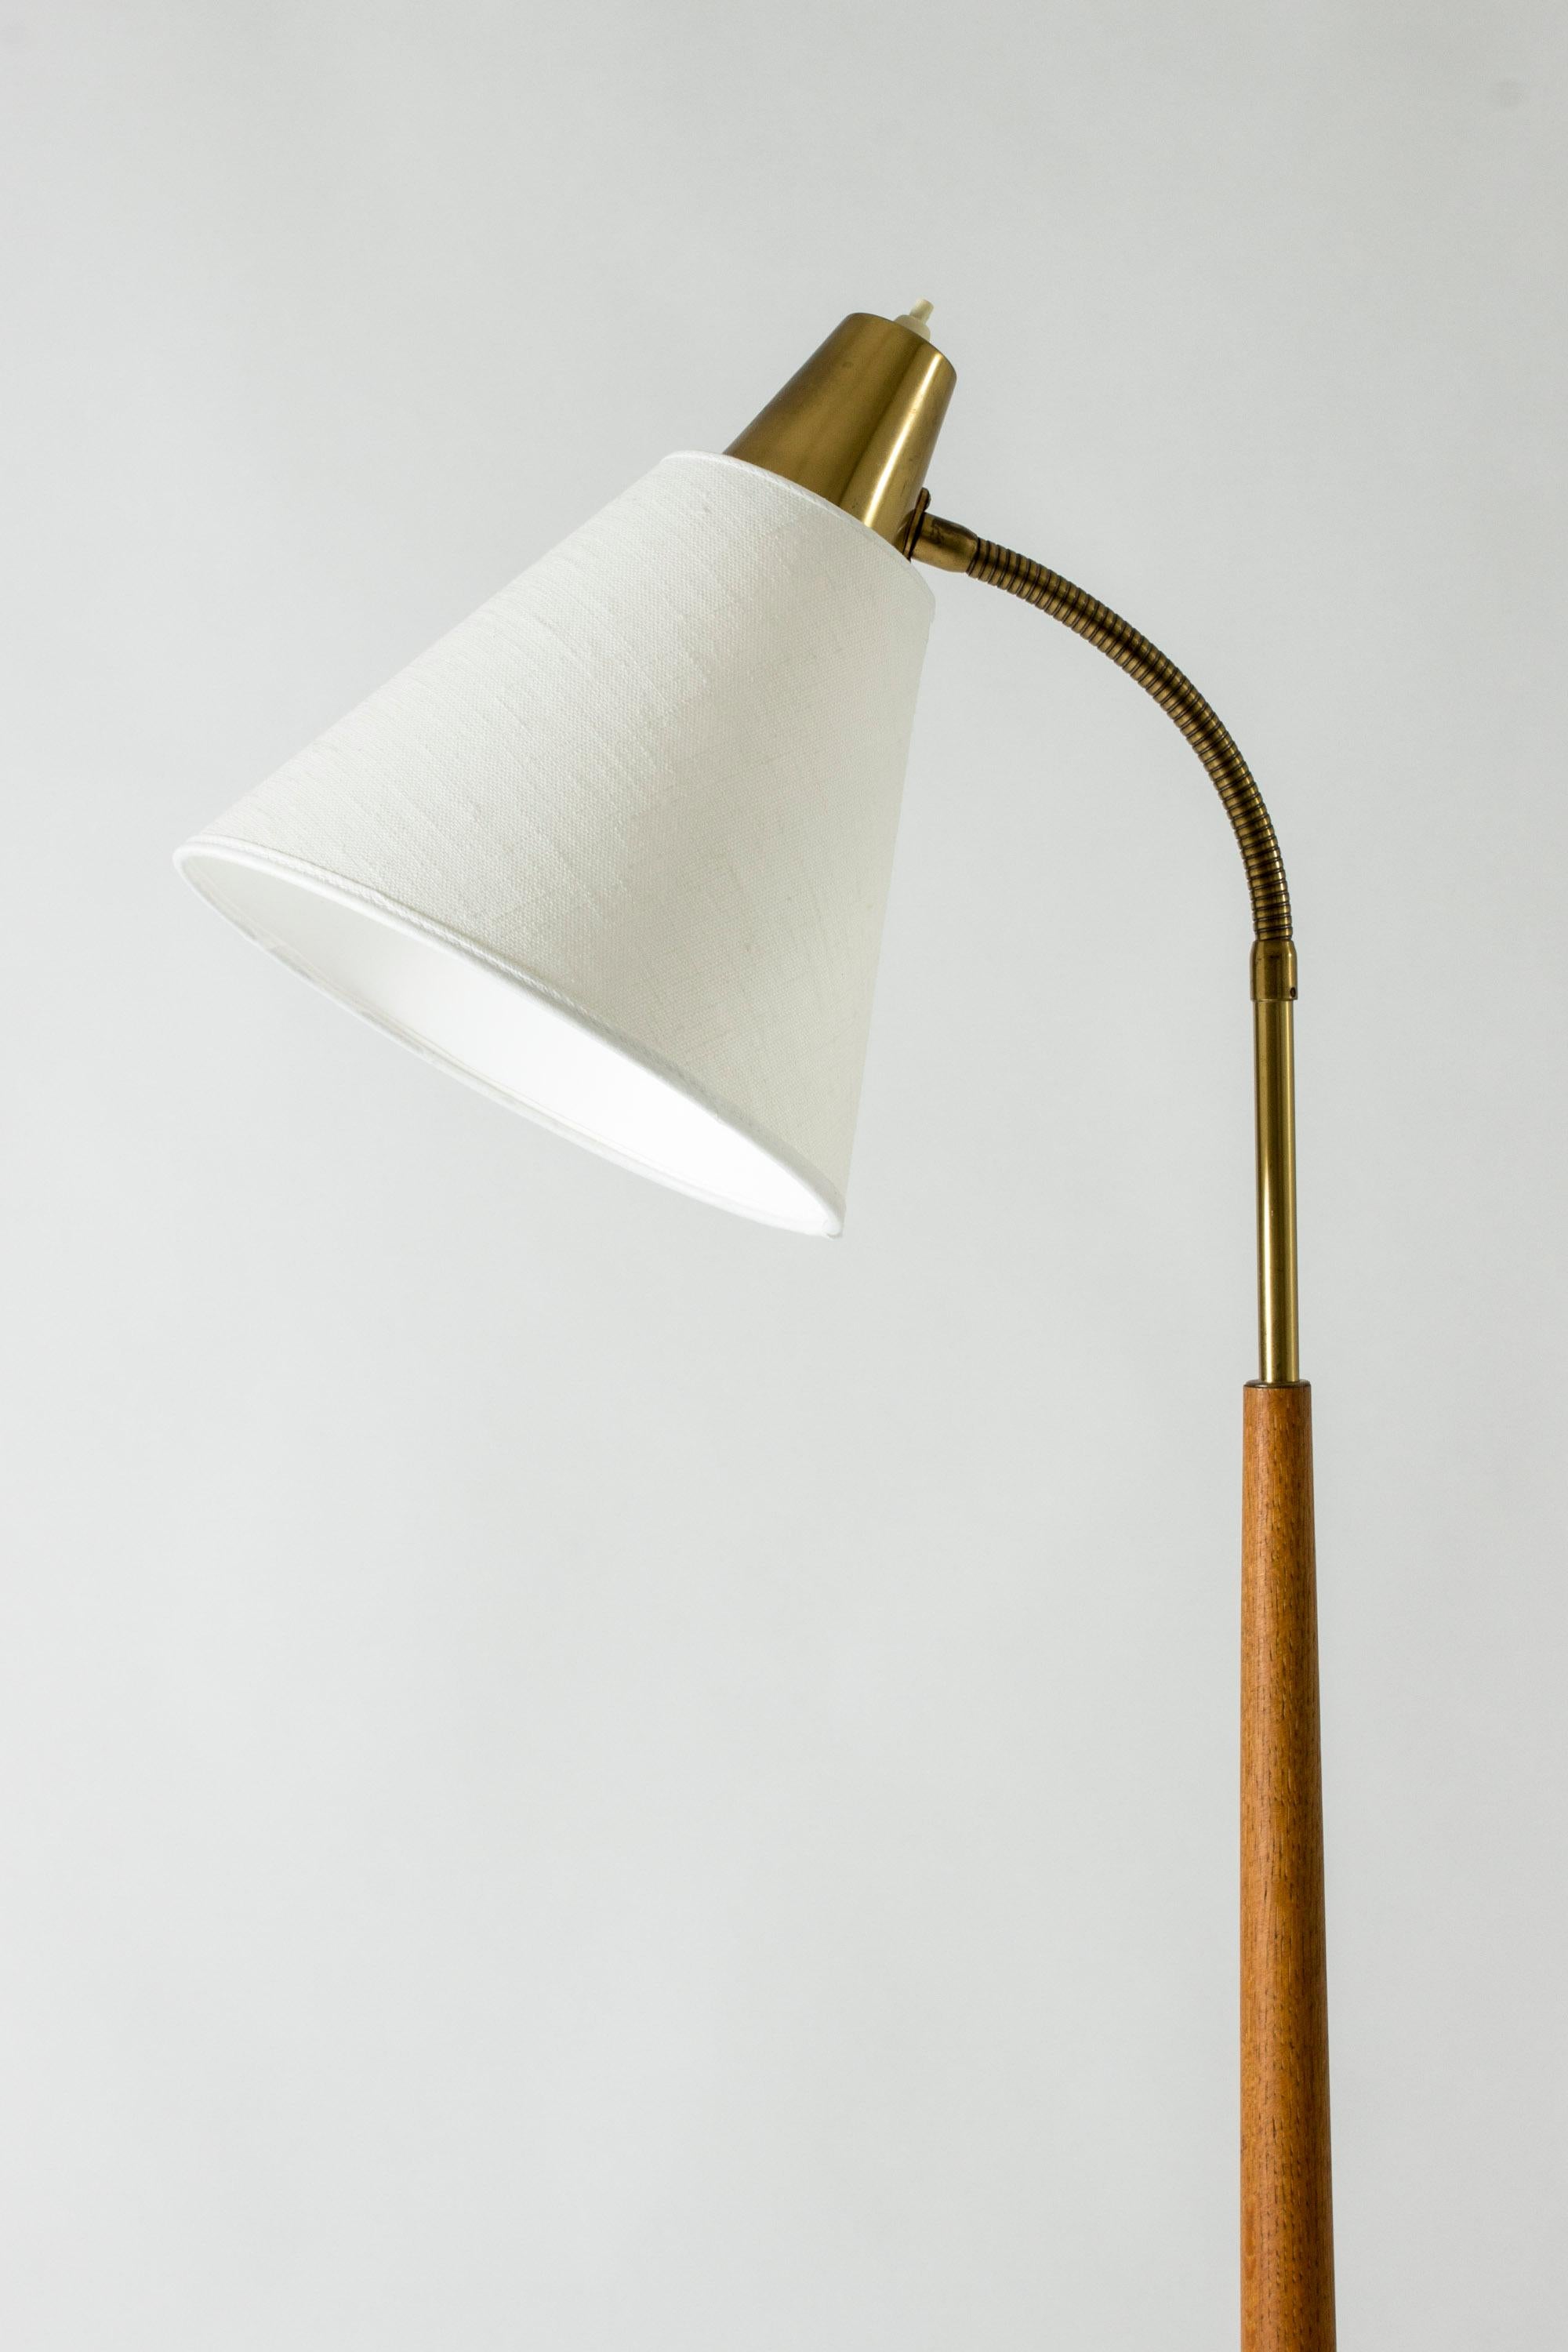 Brass floor lamp from Falkenbergs Belysning, with an elegant wooden stem and flexible neck.